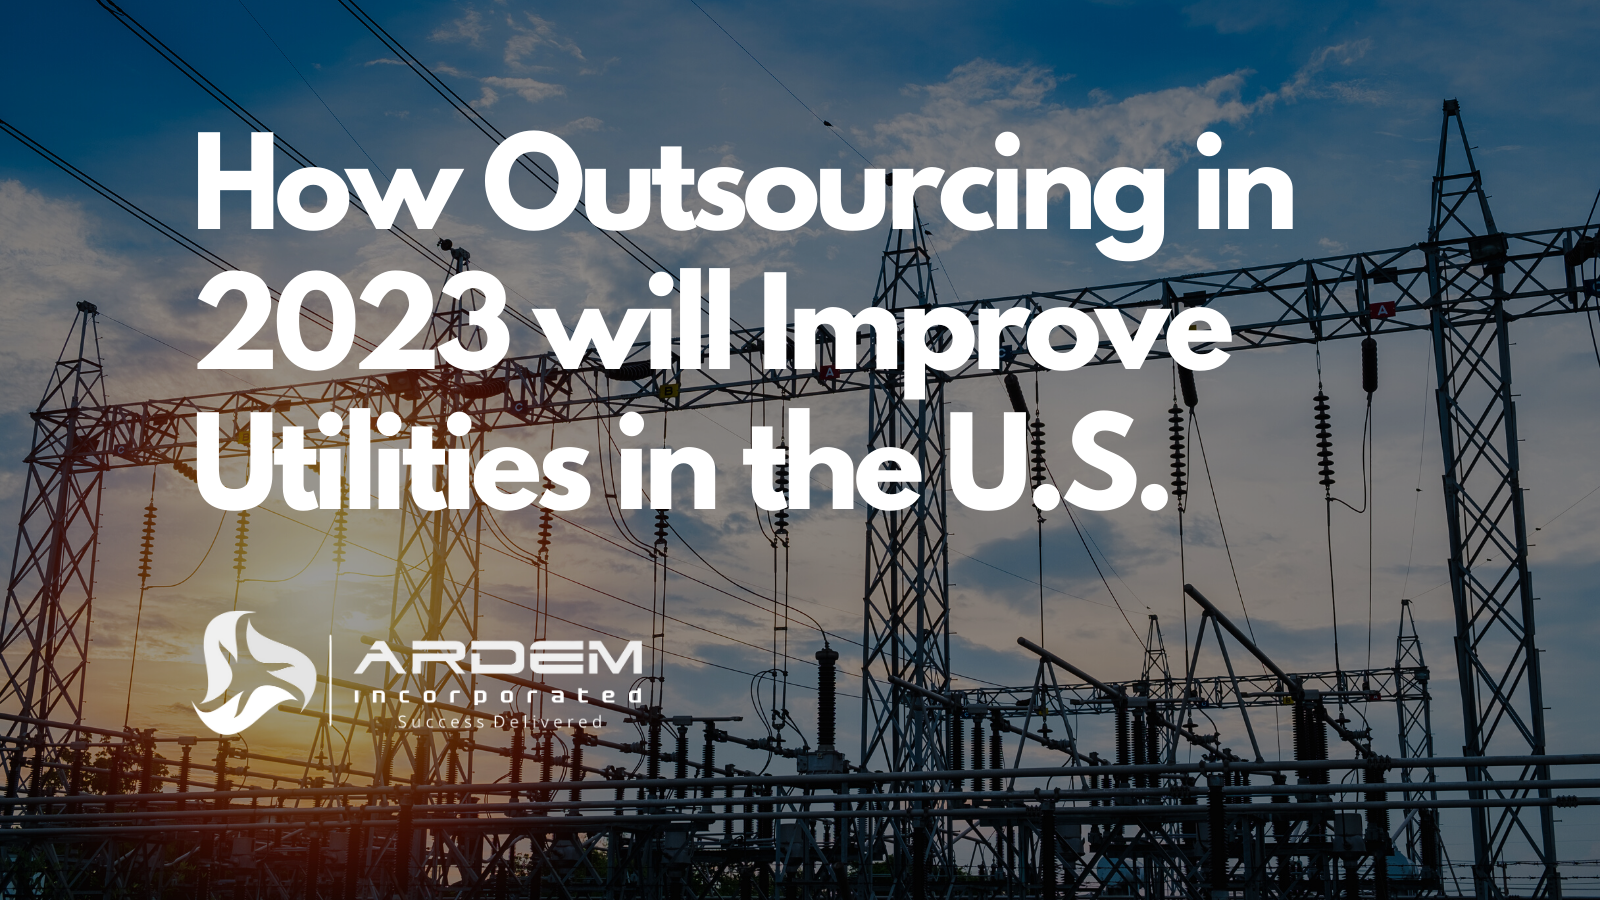 Utilities Utility Bill Outsourcing blog